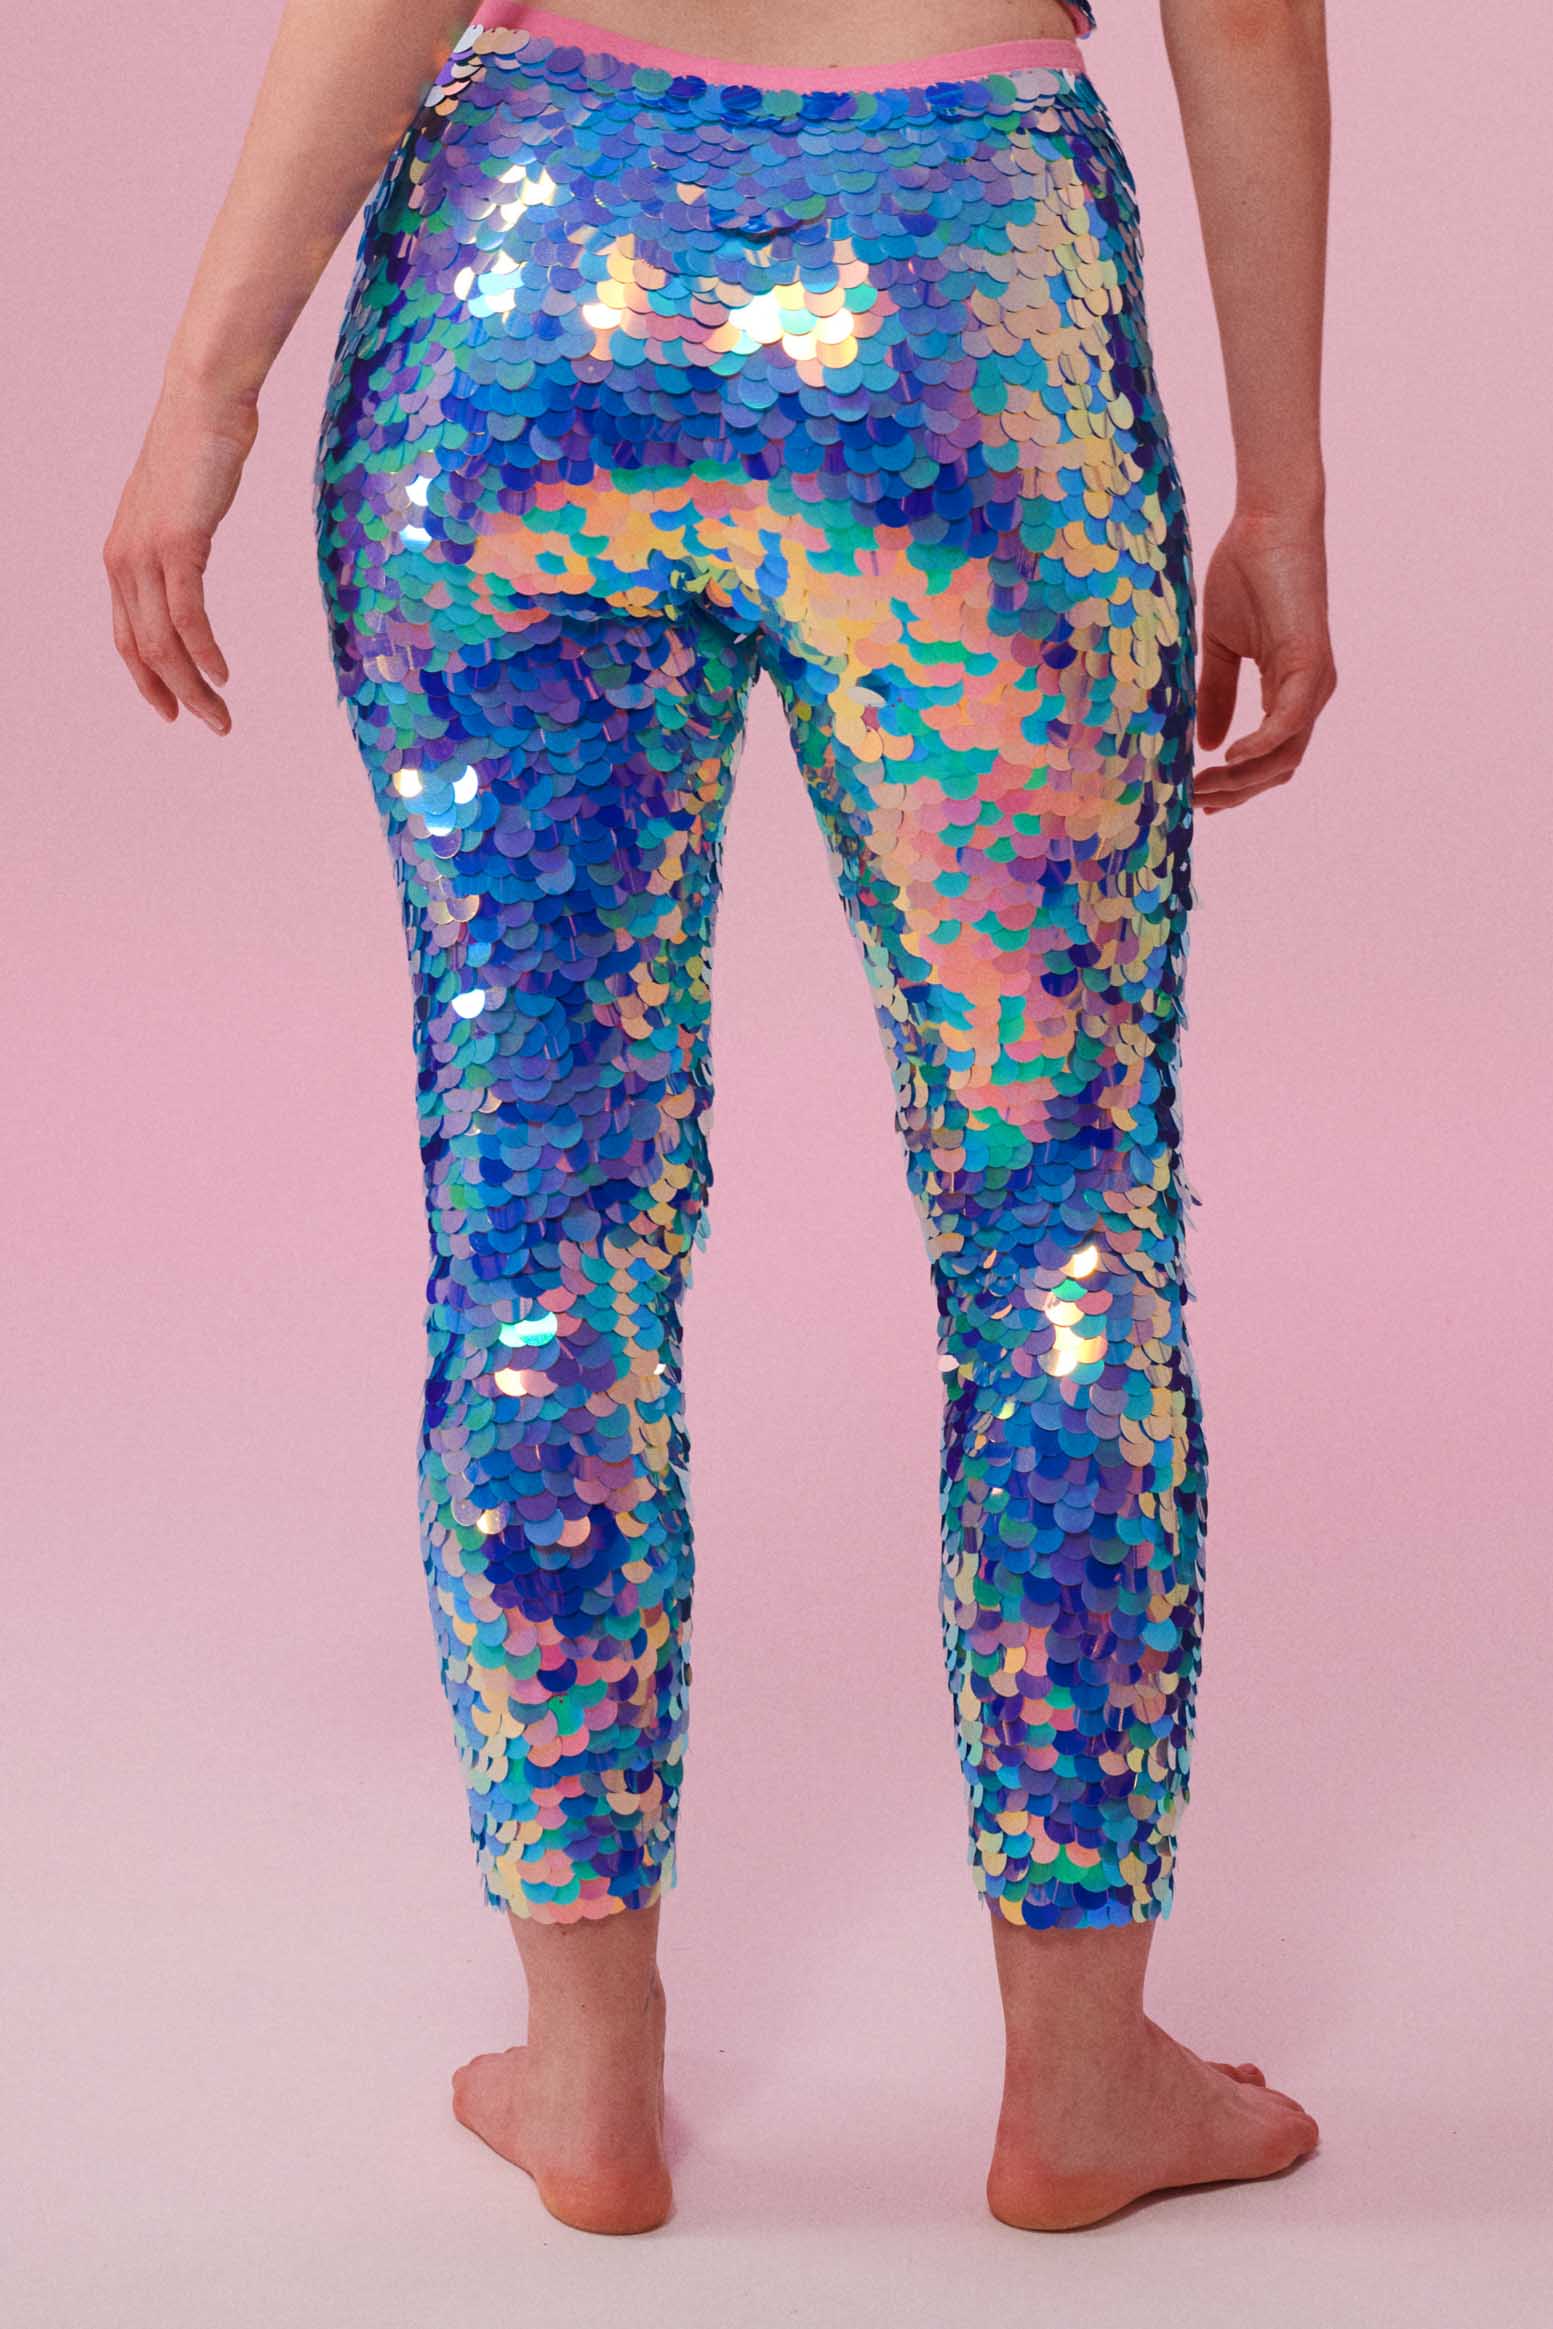 Express high waisted sequin leggings | Sequin leggings, Clothes design,  Fashion tips